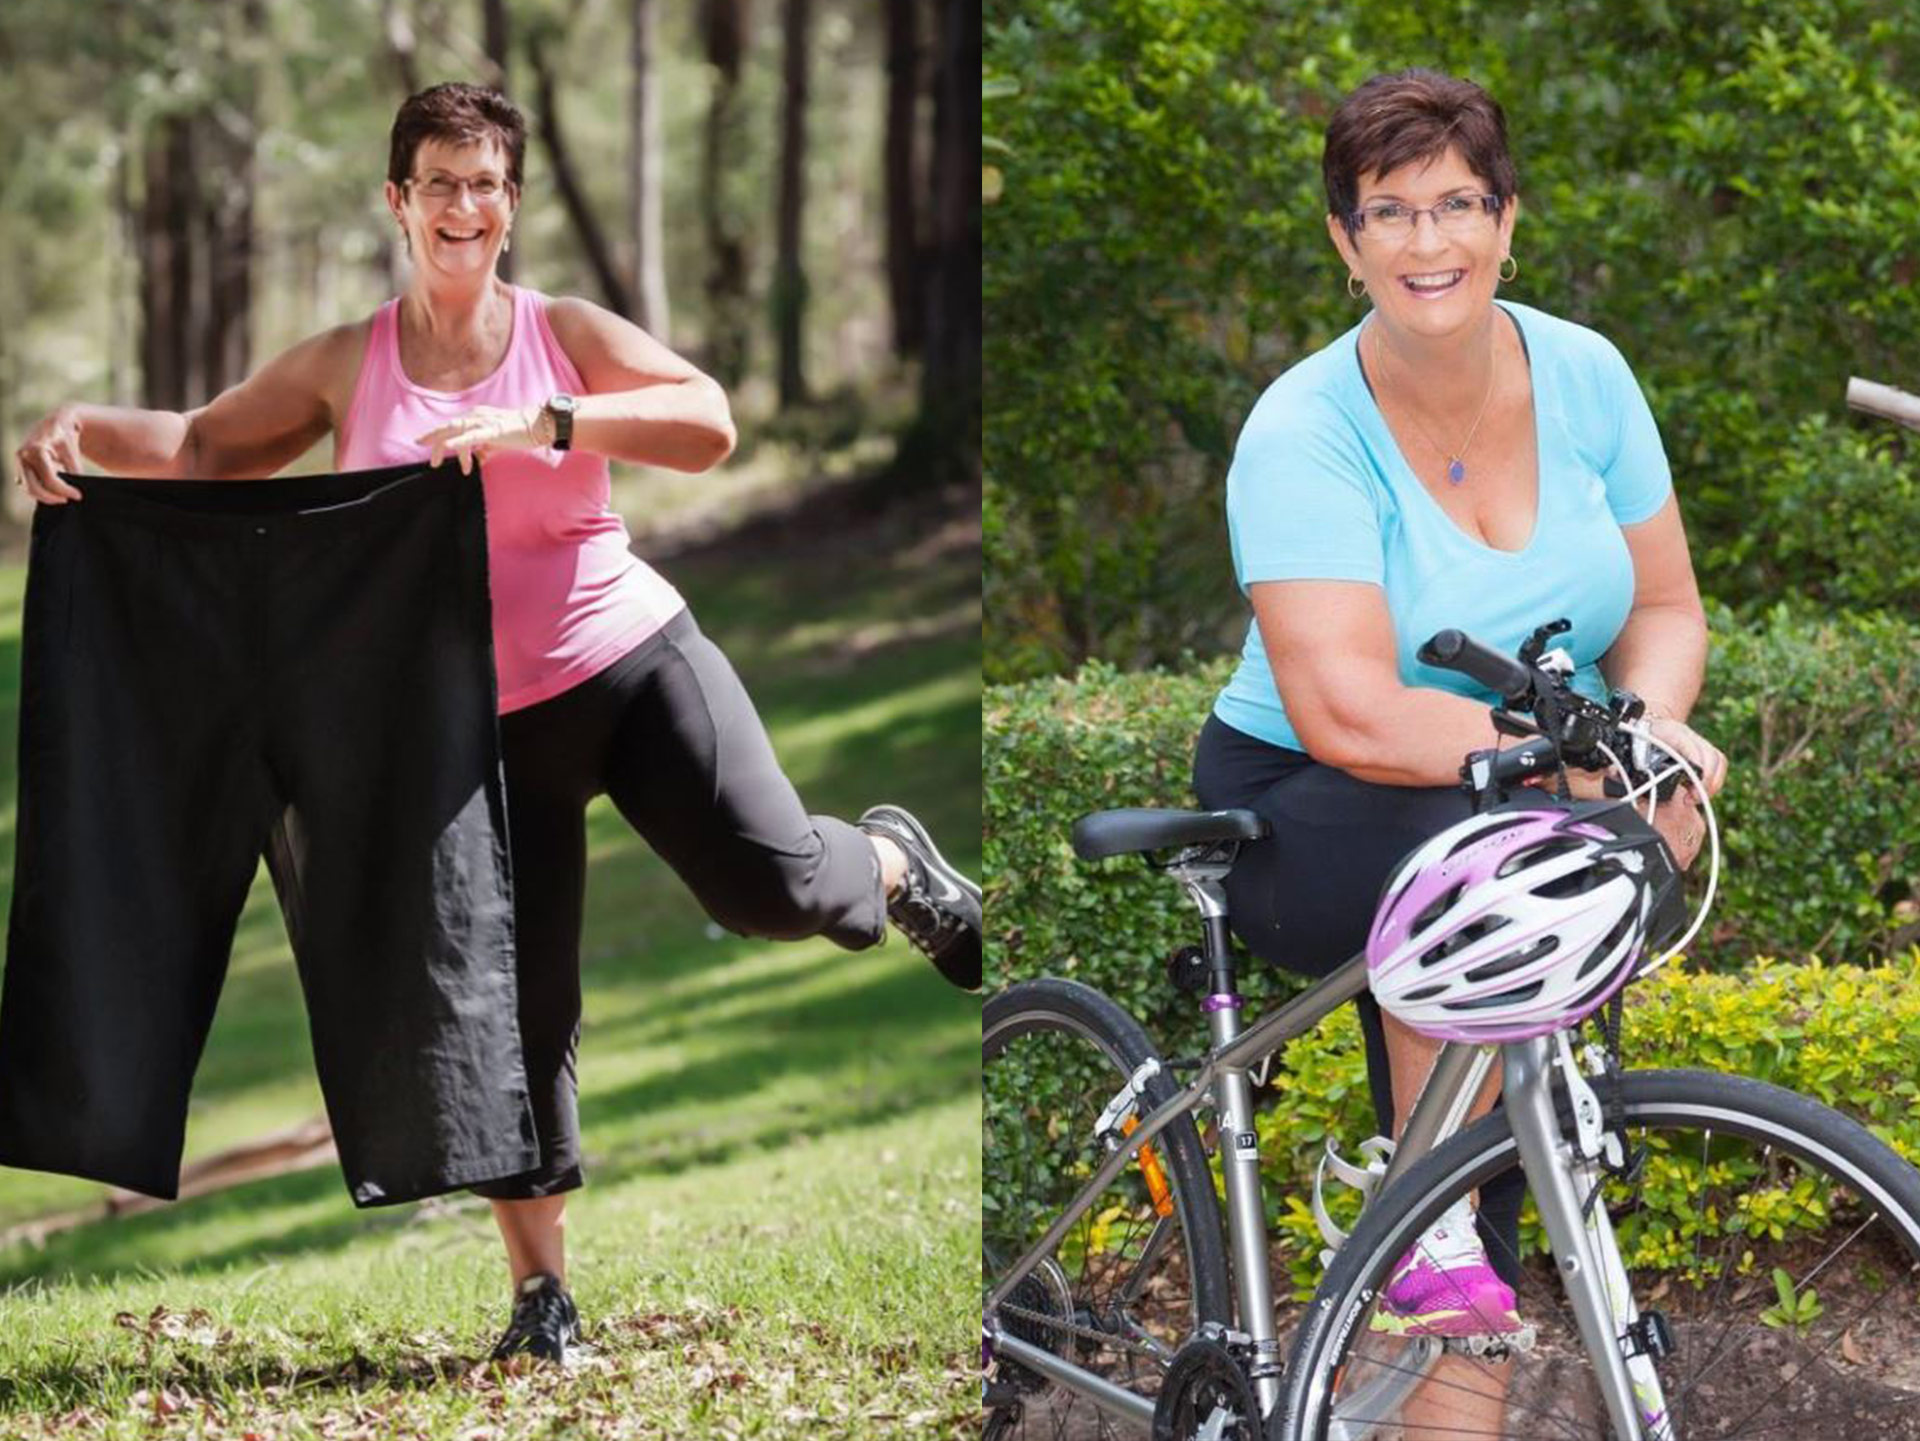 Grandmother loses 30kg after tragedy motivates a lifestyle transformation